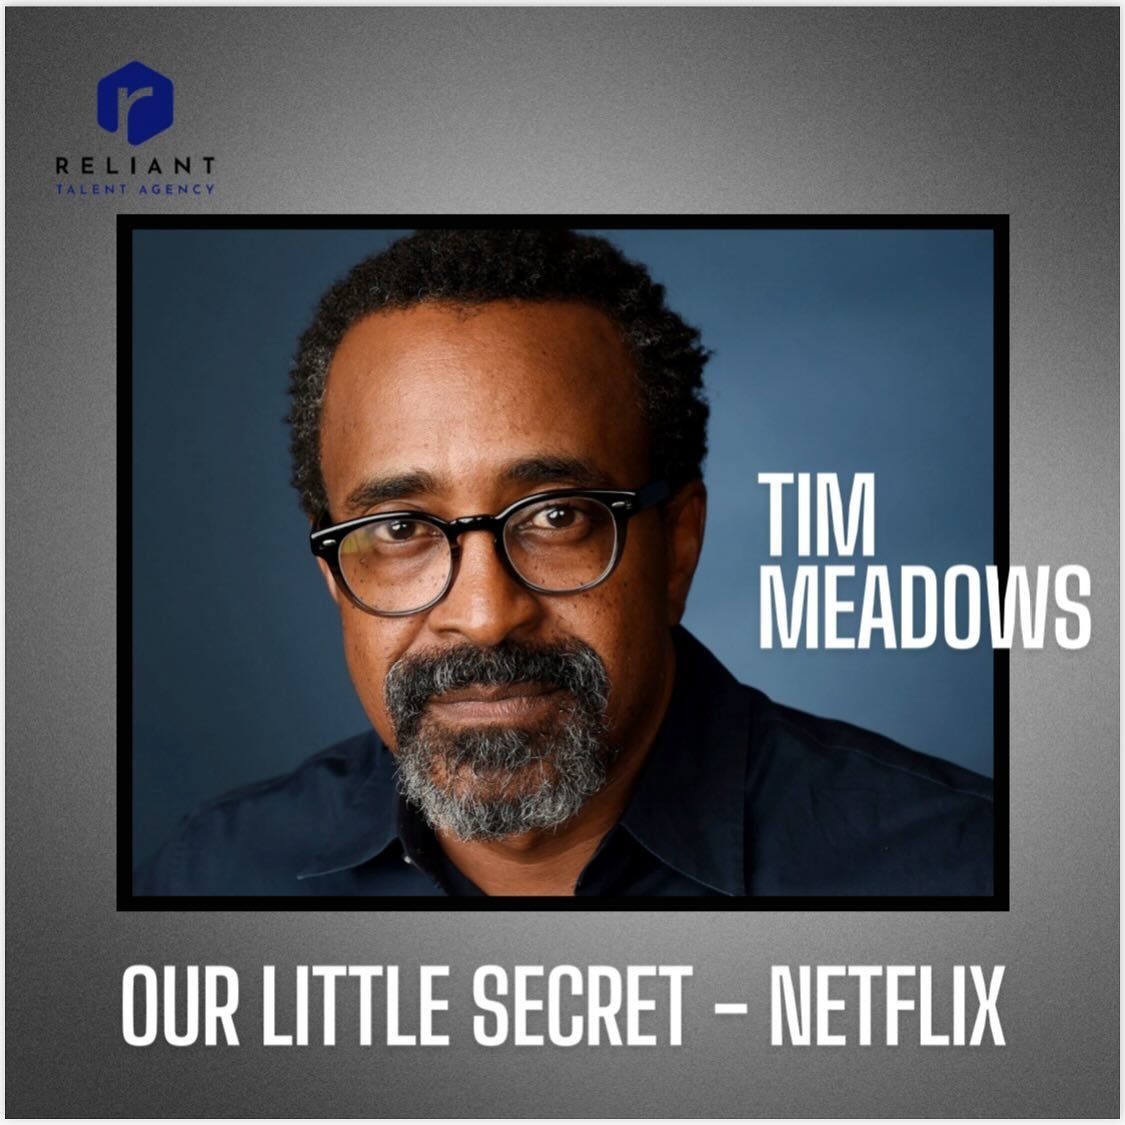 Congrats @real_timmeadows on Our Little Secret - out this year on Netflix!

https://ew.com/lindsay-lohan-tim-meadows-netflix-movie-8547116